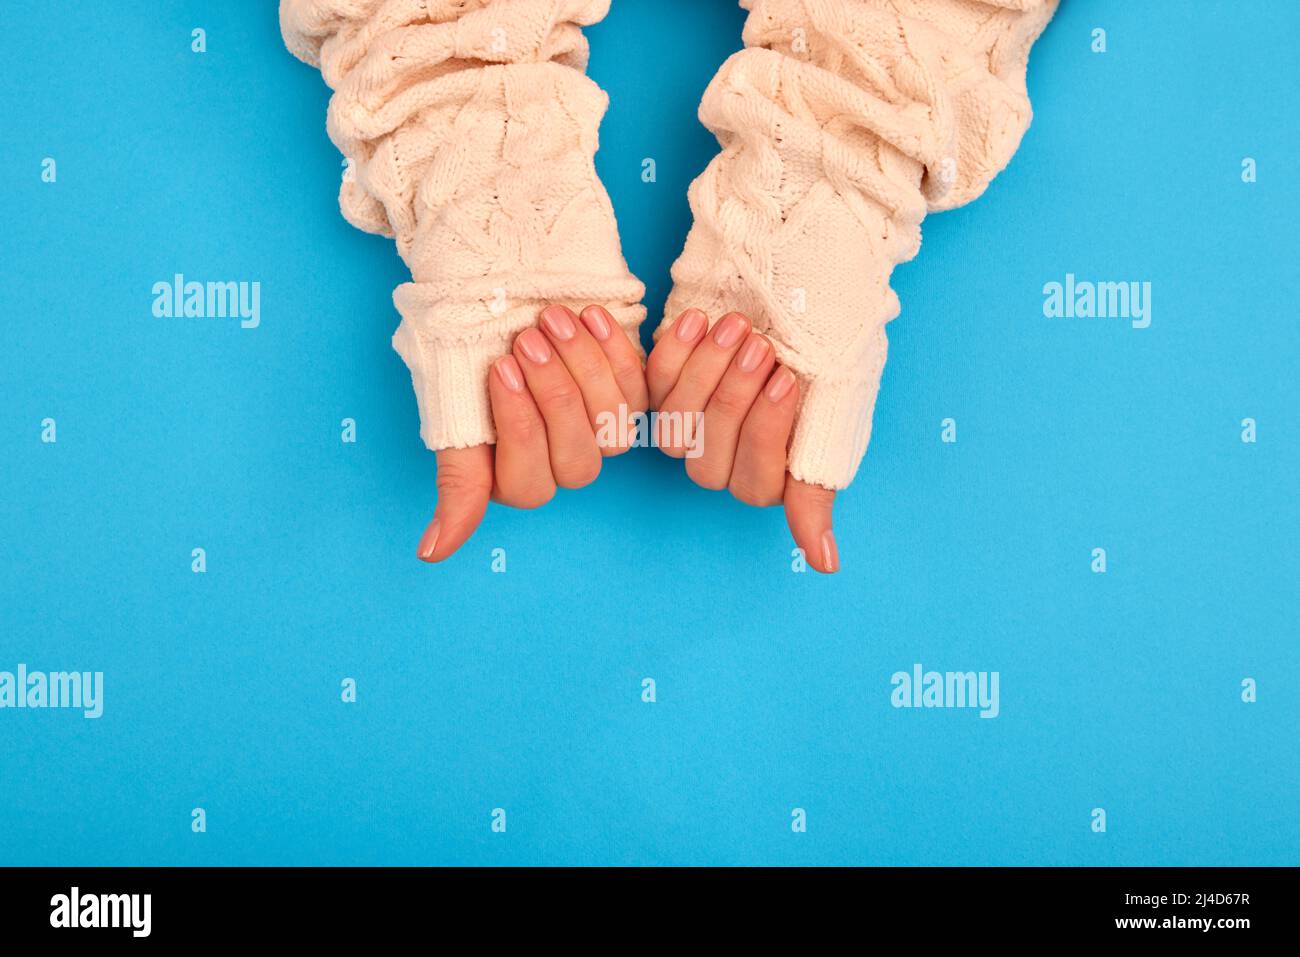 Neat manicure female hands sweater sleeves nude naturel on a blue background Stock Photo